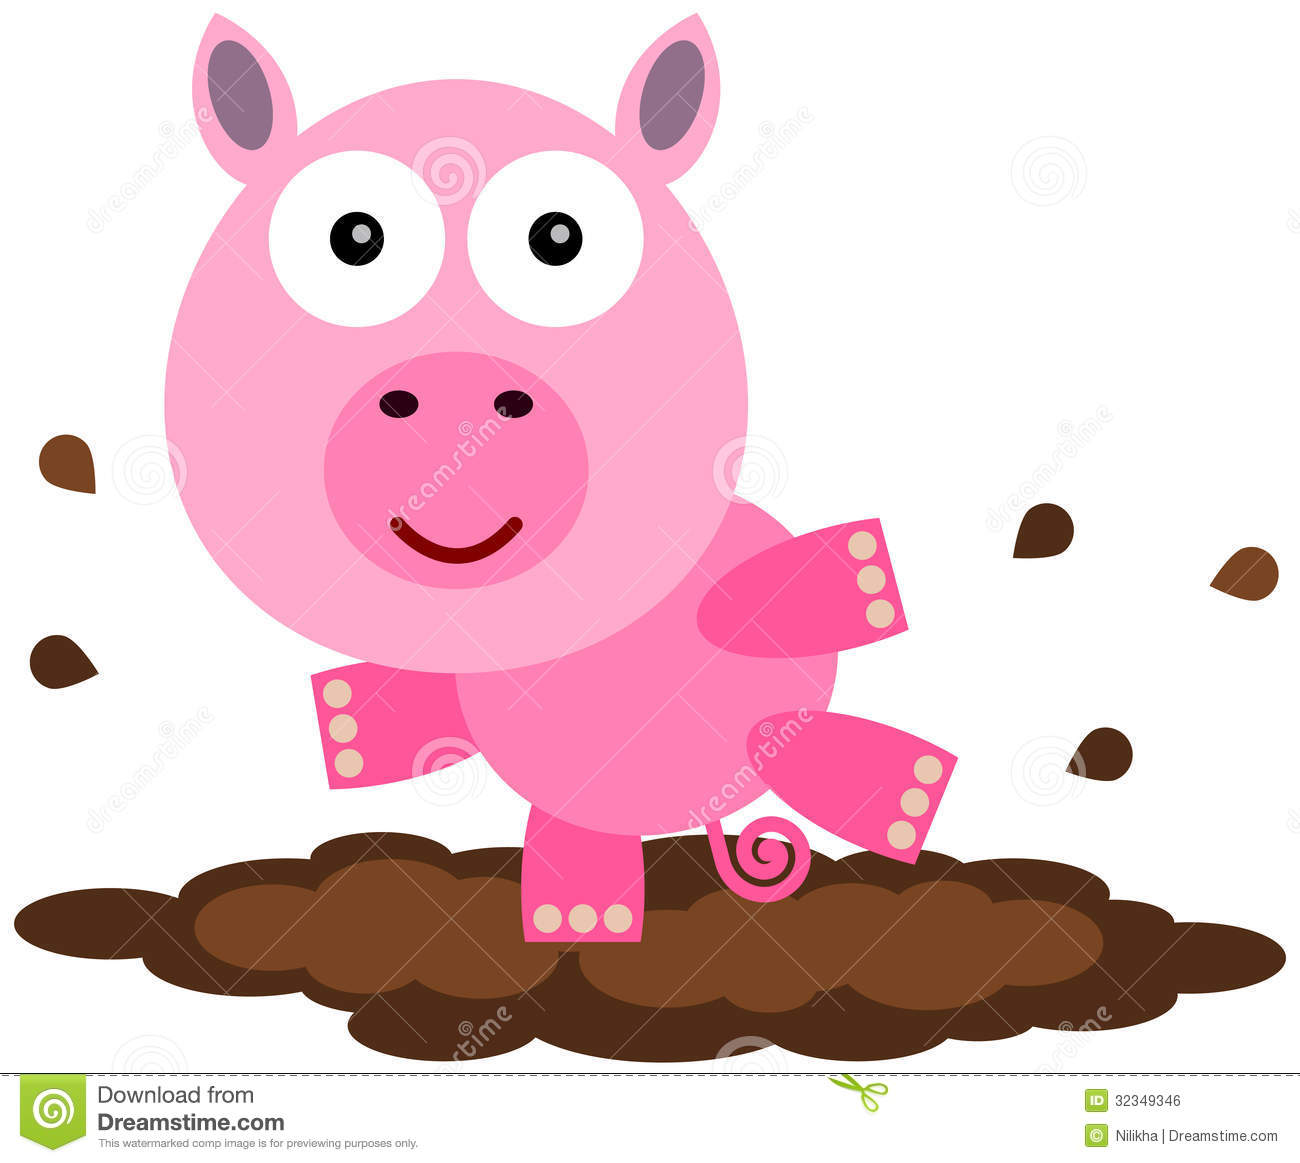 Pig Of The Mud Royalty Free Stock Image   Image  32349346